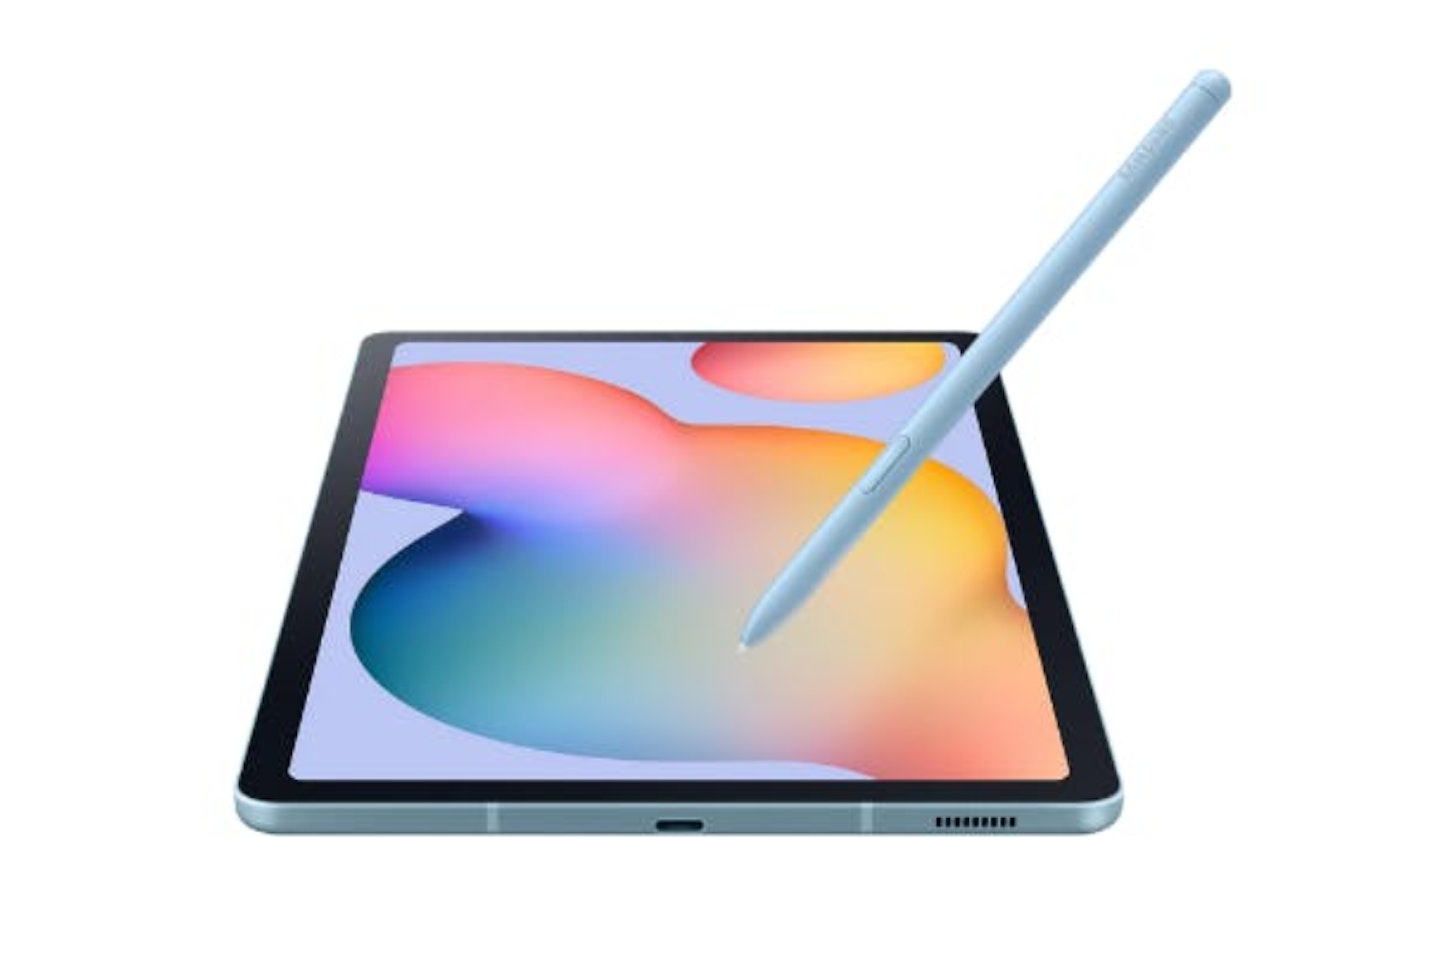 Samsung Galaxy Tab S6 Lite - one of the best Android tablets